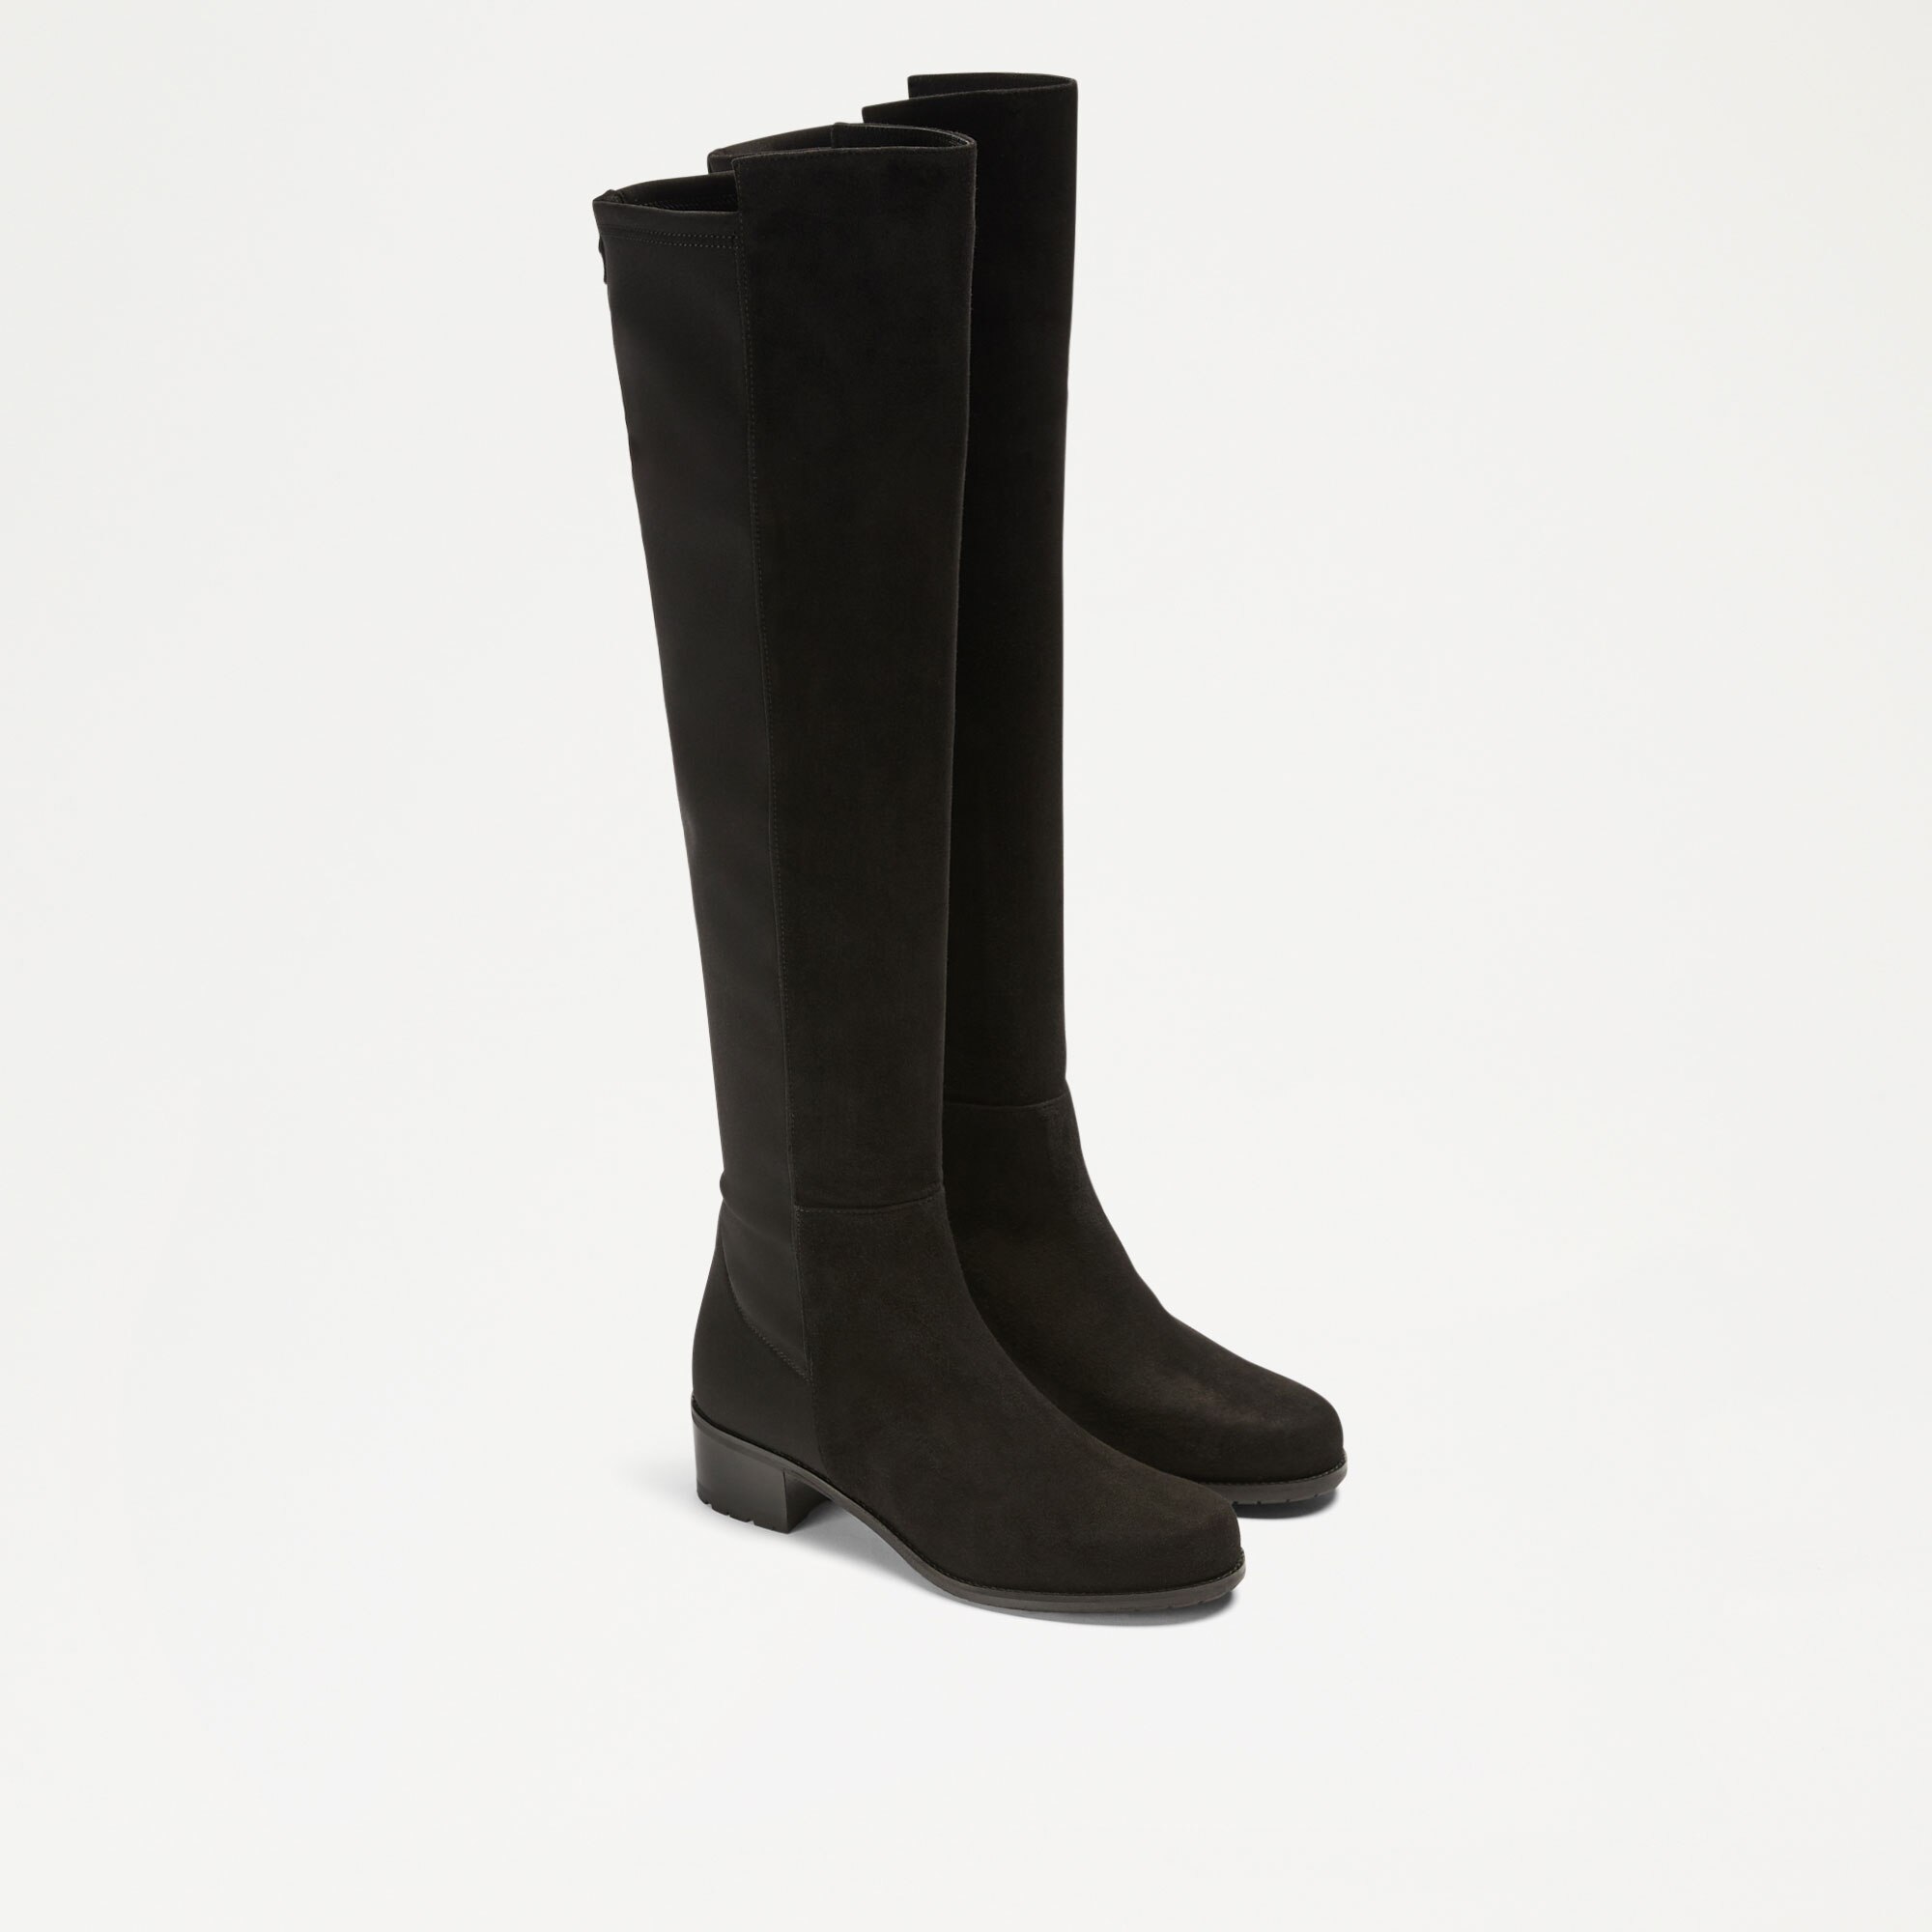 HALF FULL Knee High Boot in Black Suede | Russell & Bromley